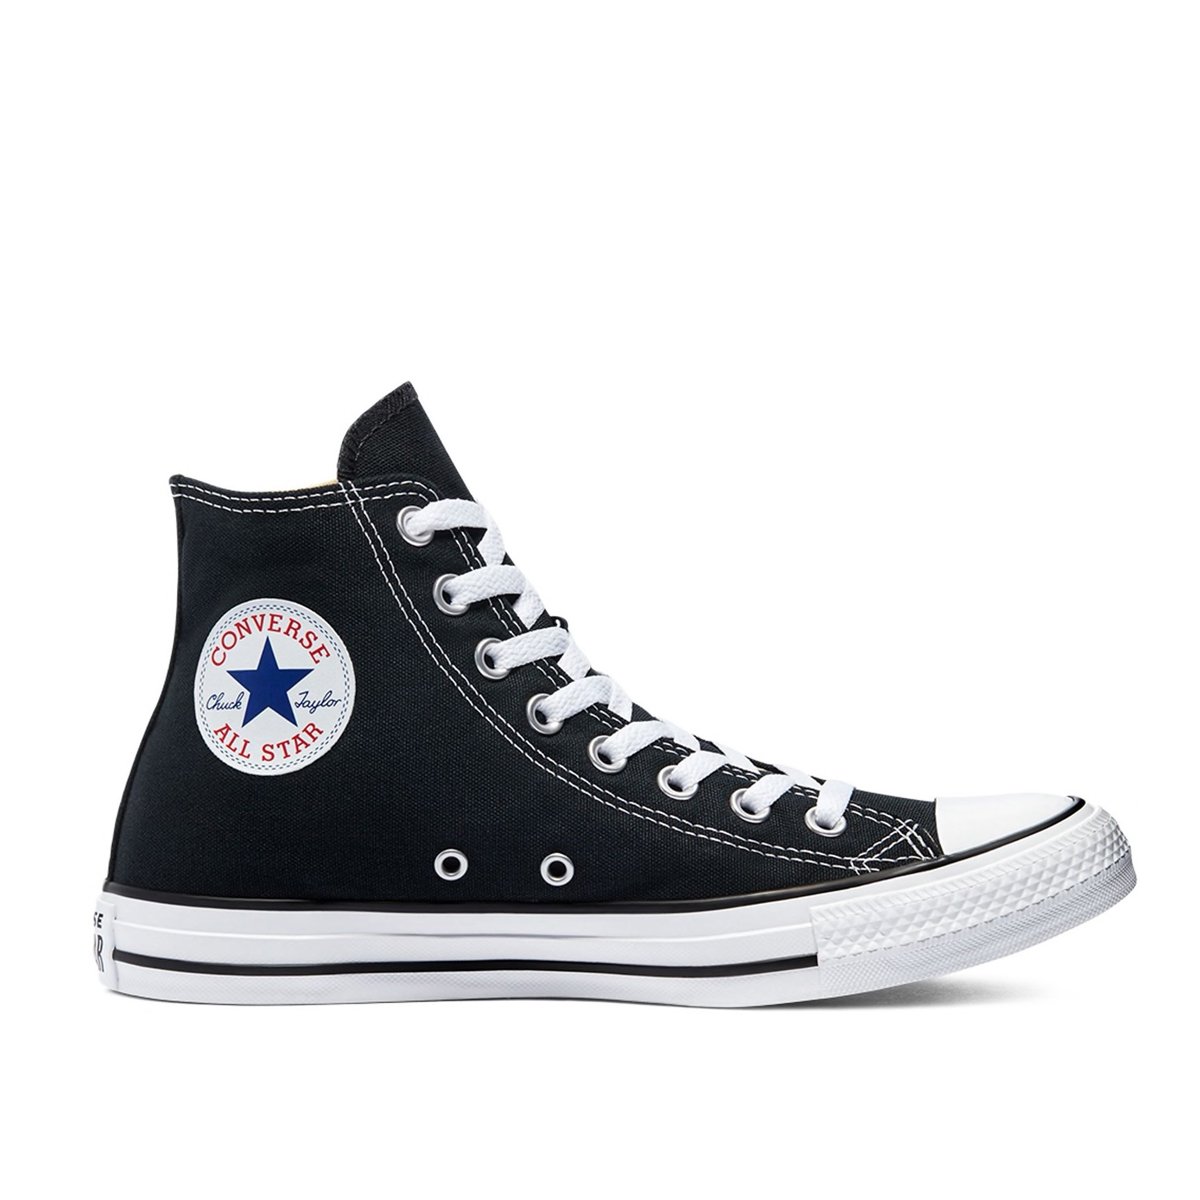 Converse Chuck Taylor All Star High Trainers, £57